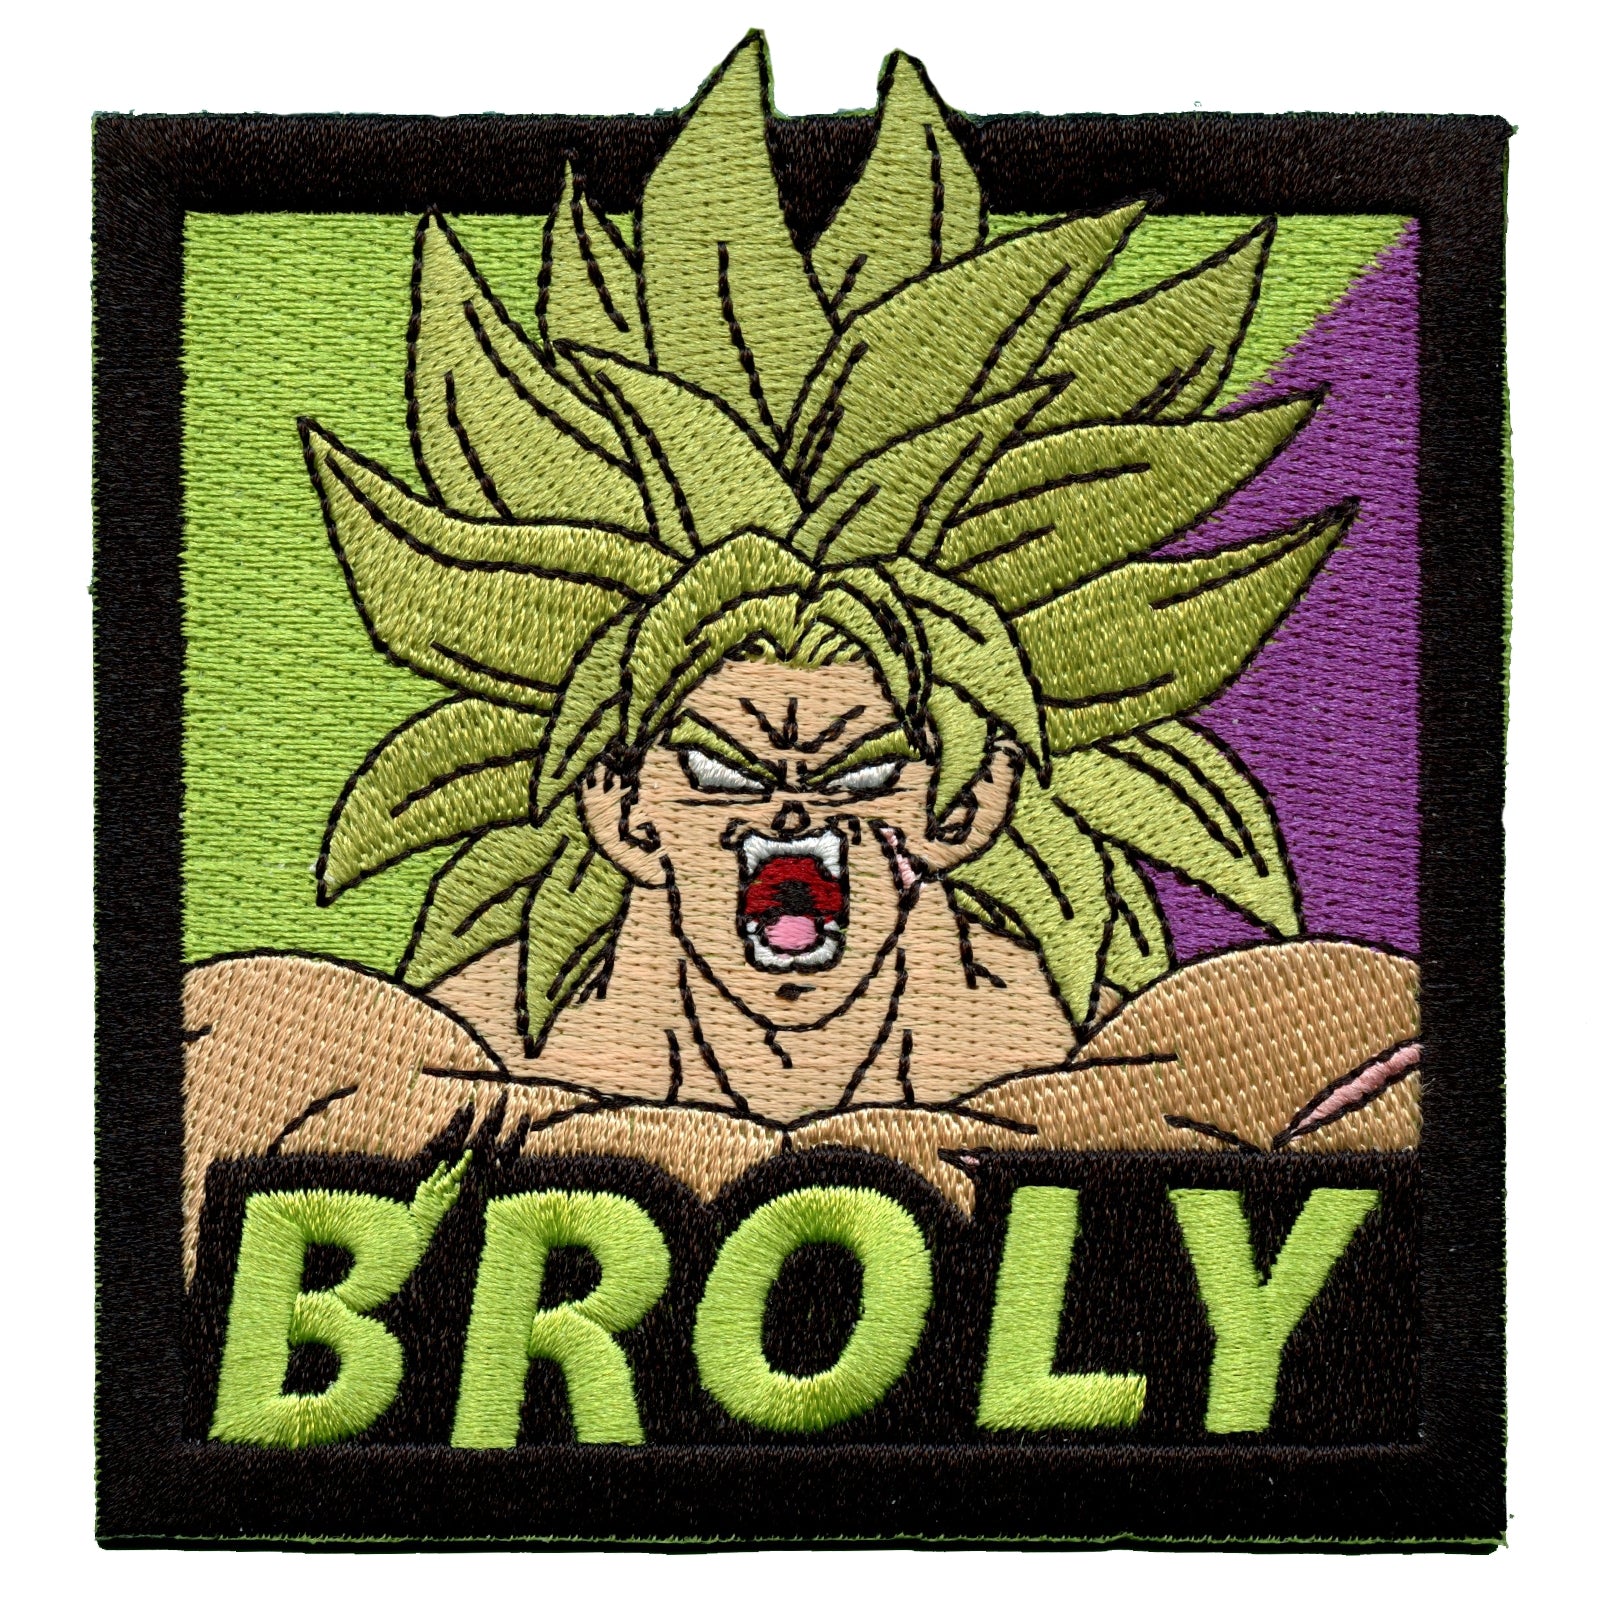 Dragon Ball Super Broly SS Broly Anime Square Embroidered Patch 